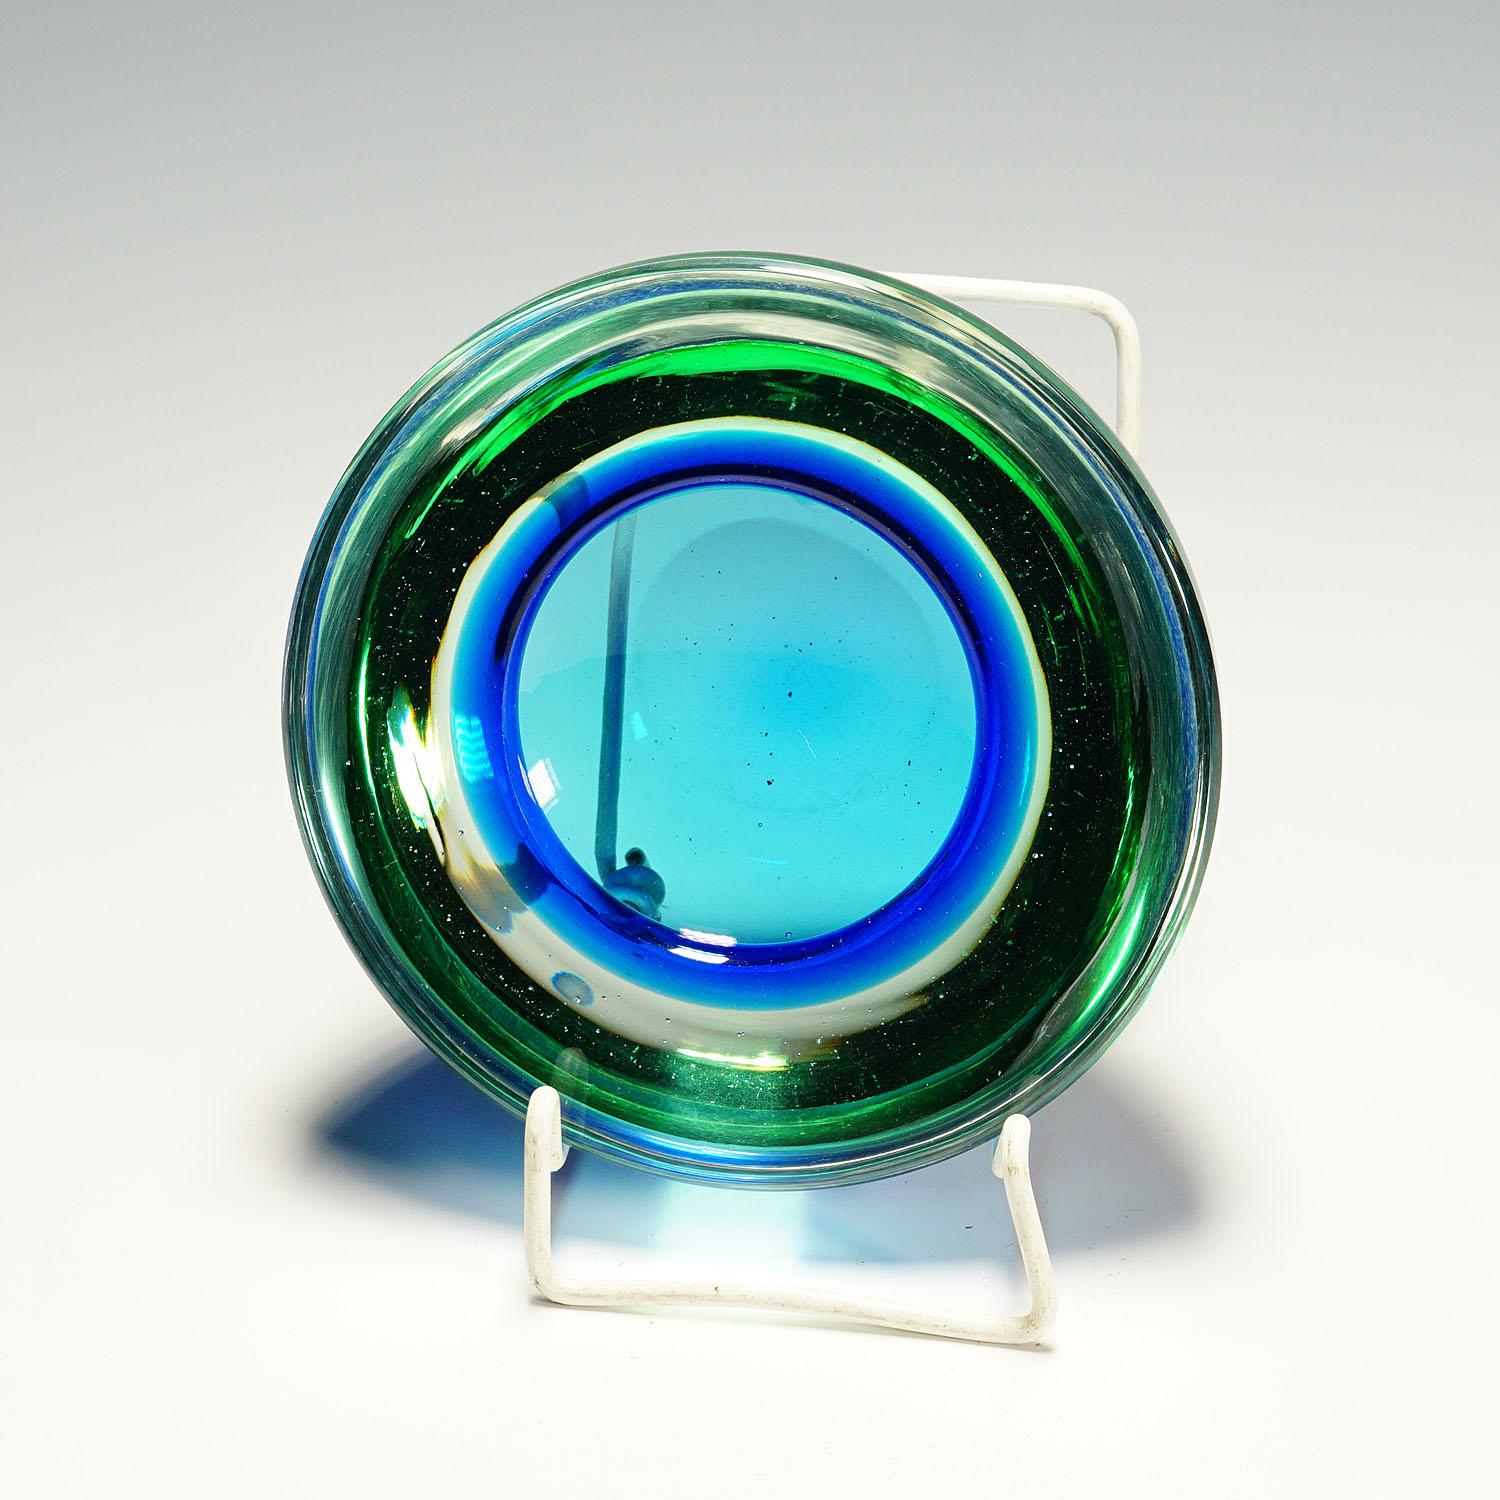 Hand-Crafted Archimede Seguso Geode Bowl in Green and Blue, Murano Italy Ca. 1950s For Sale